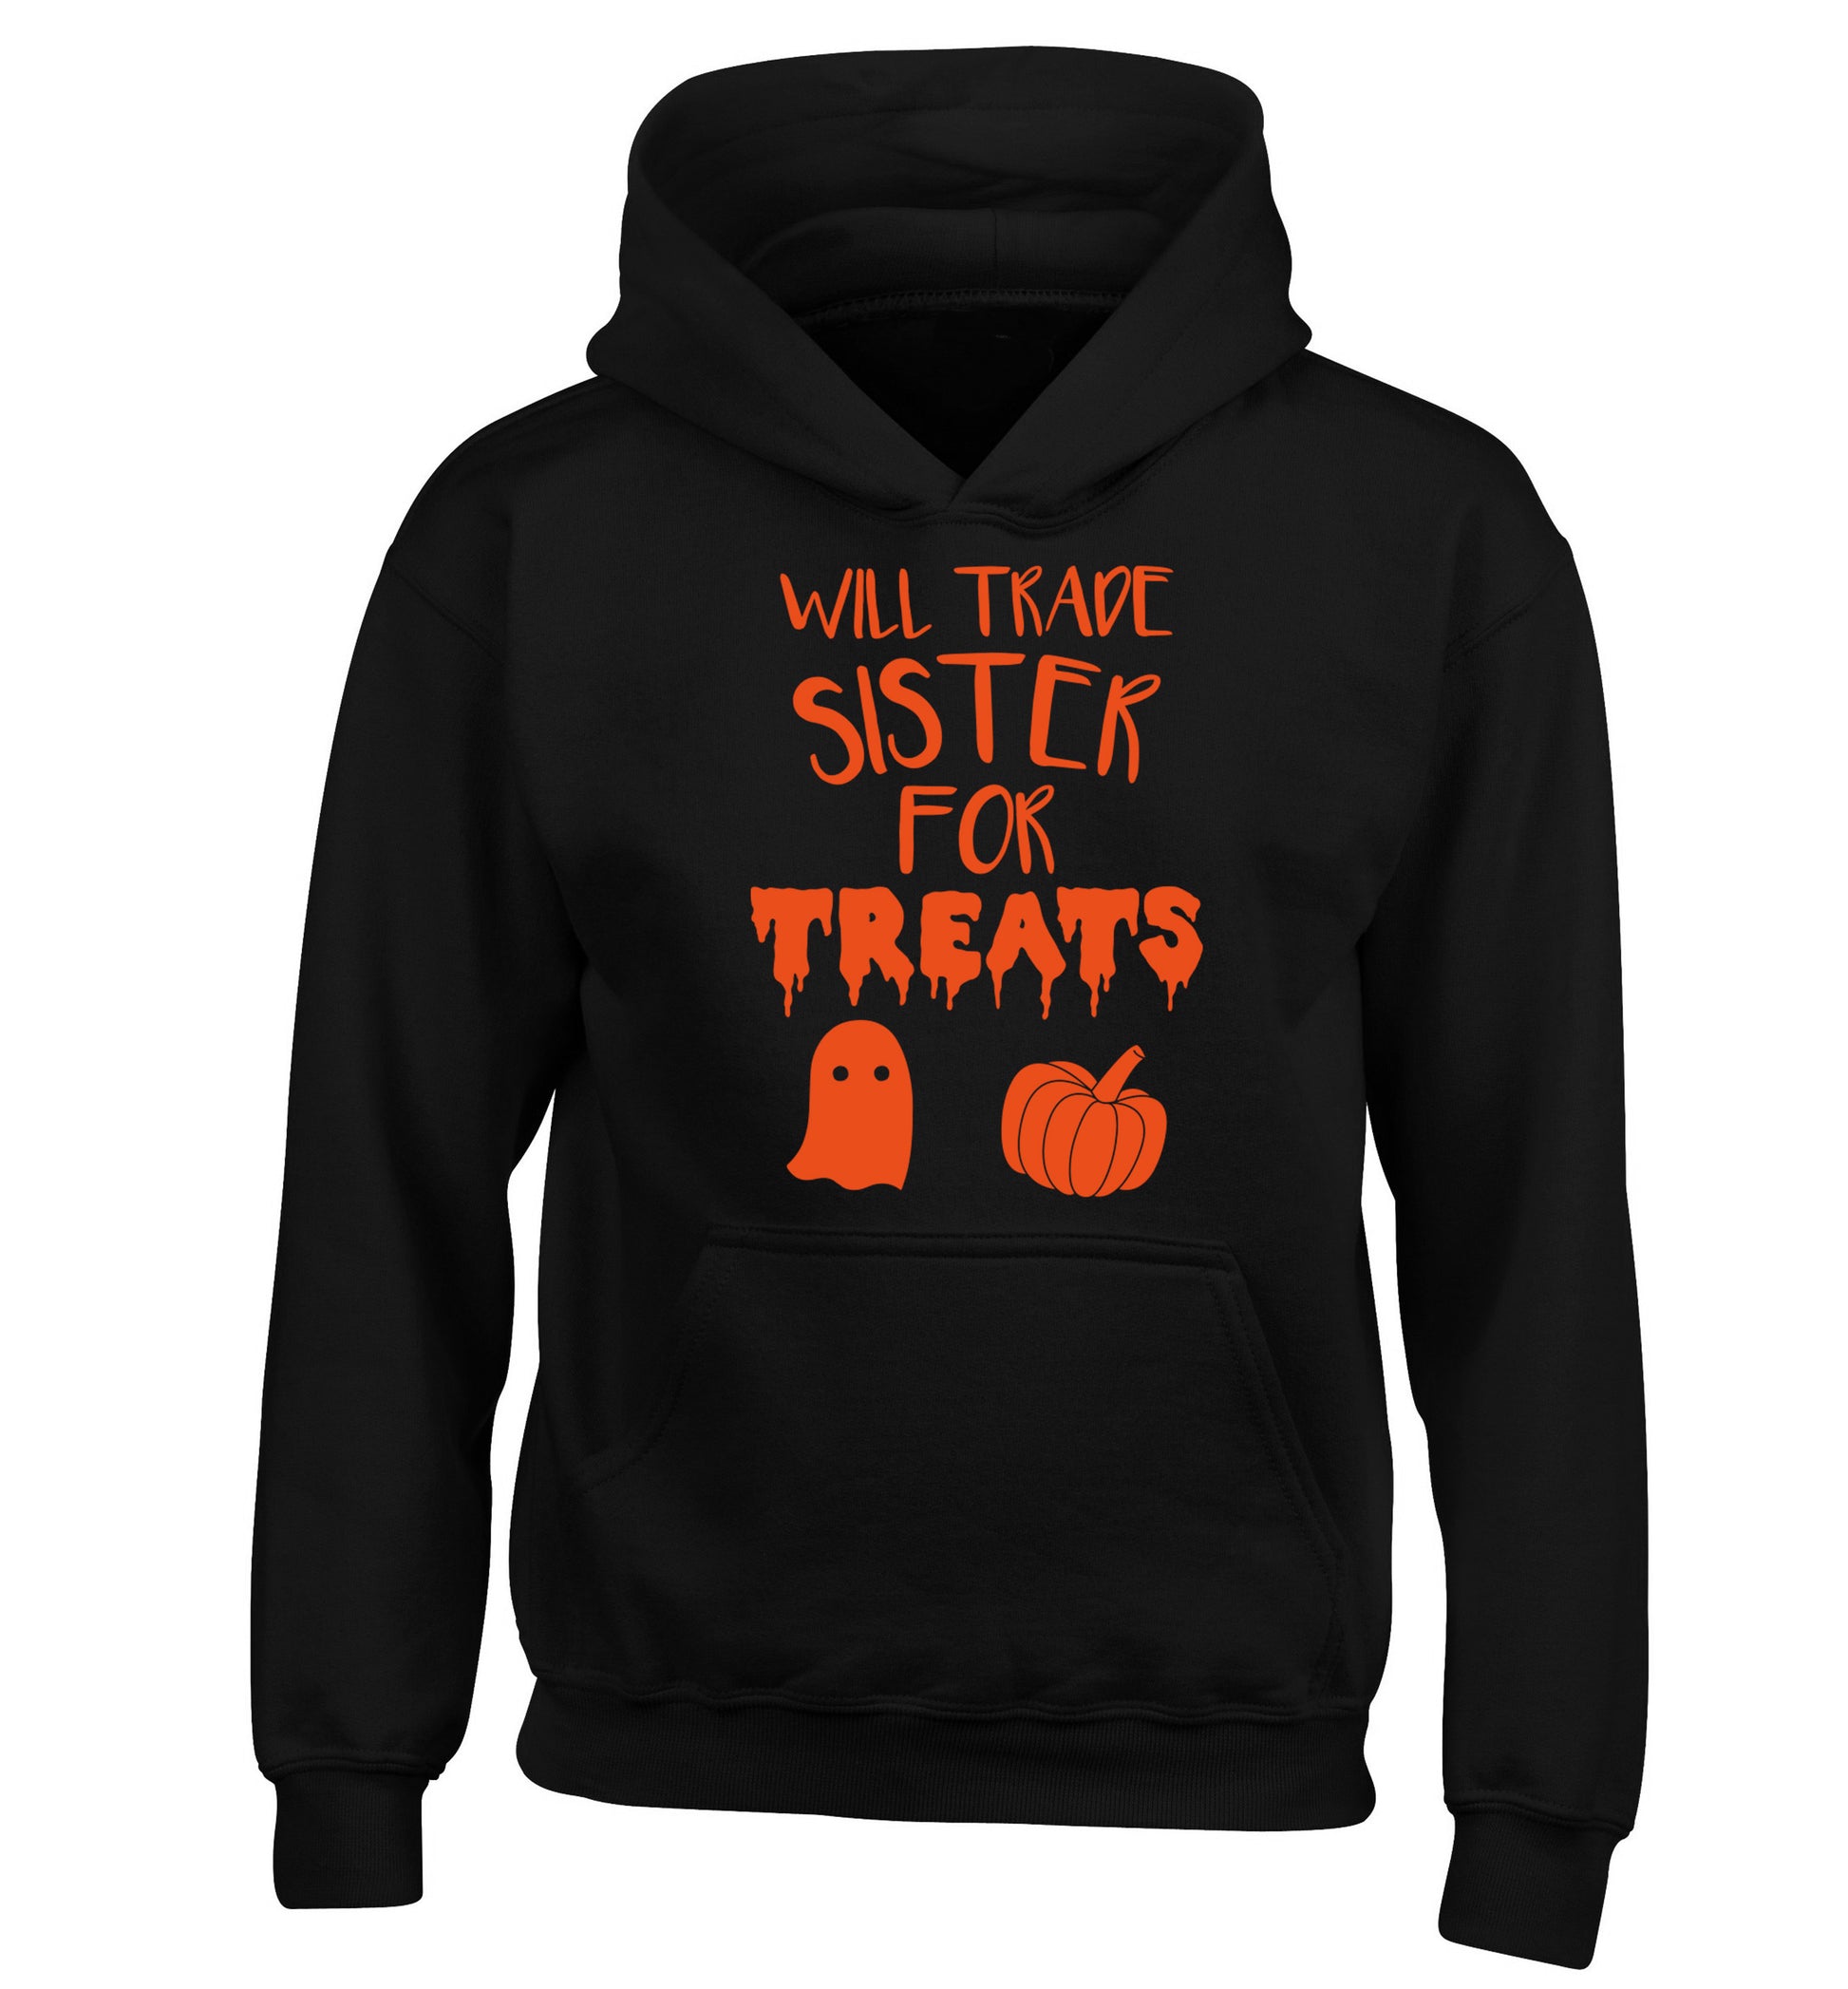 Will trade sister for treats children's black hoodie 12-14 Years